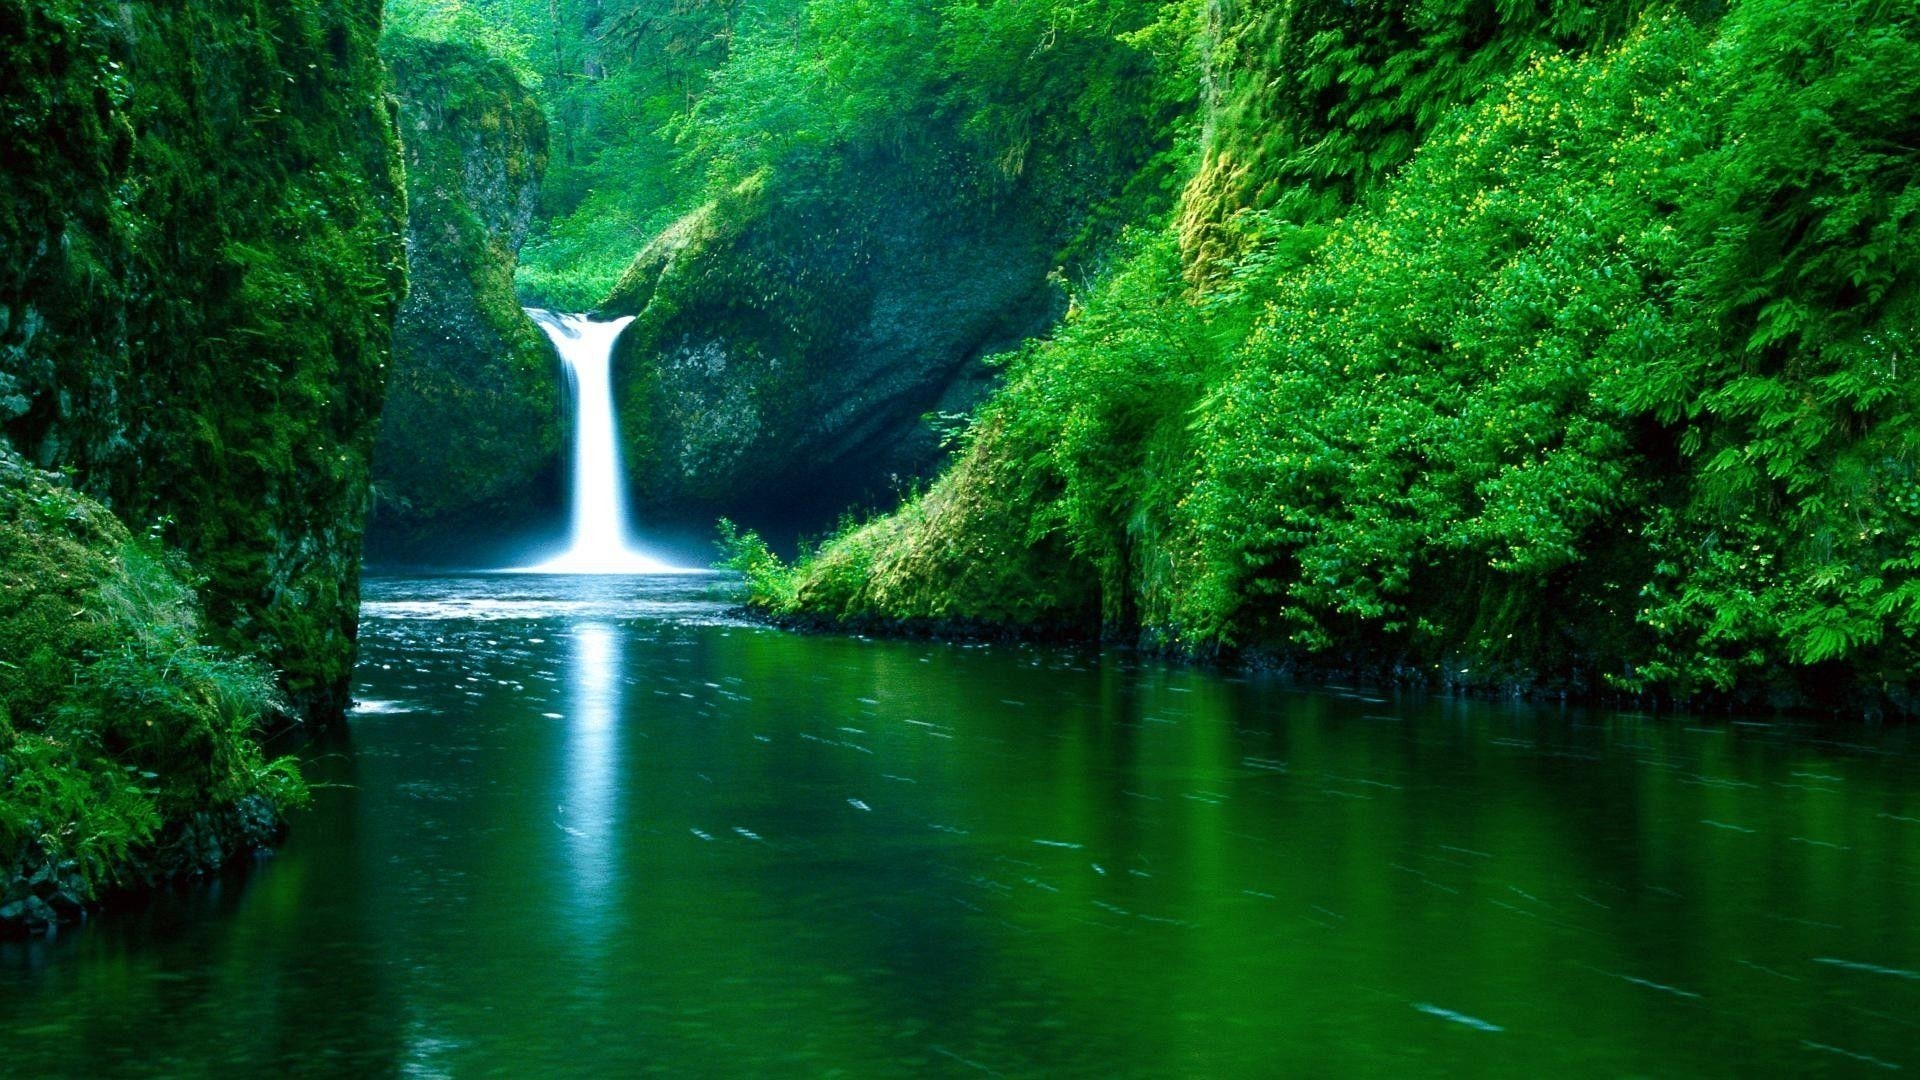 10 Best Nature Hd Wallpaper 1920X1080 FULL HD 1080p For PC Background